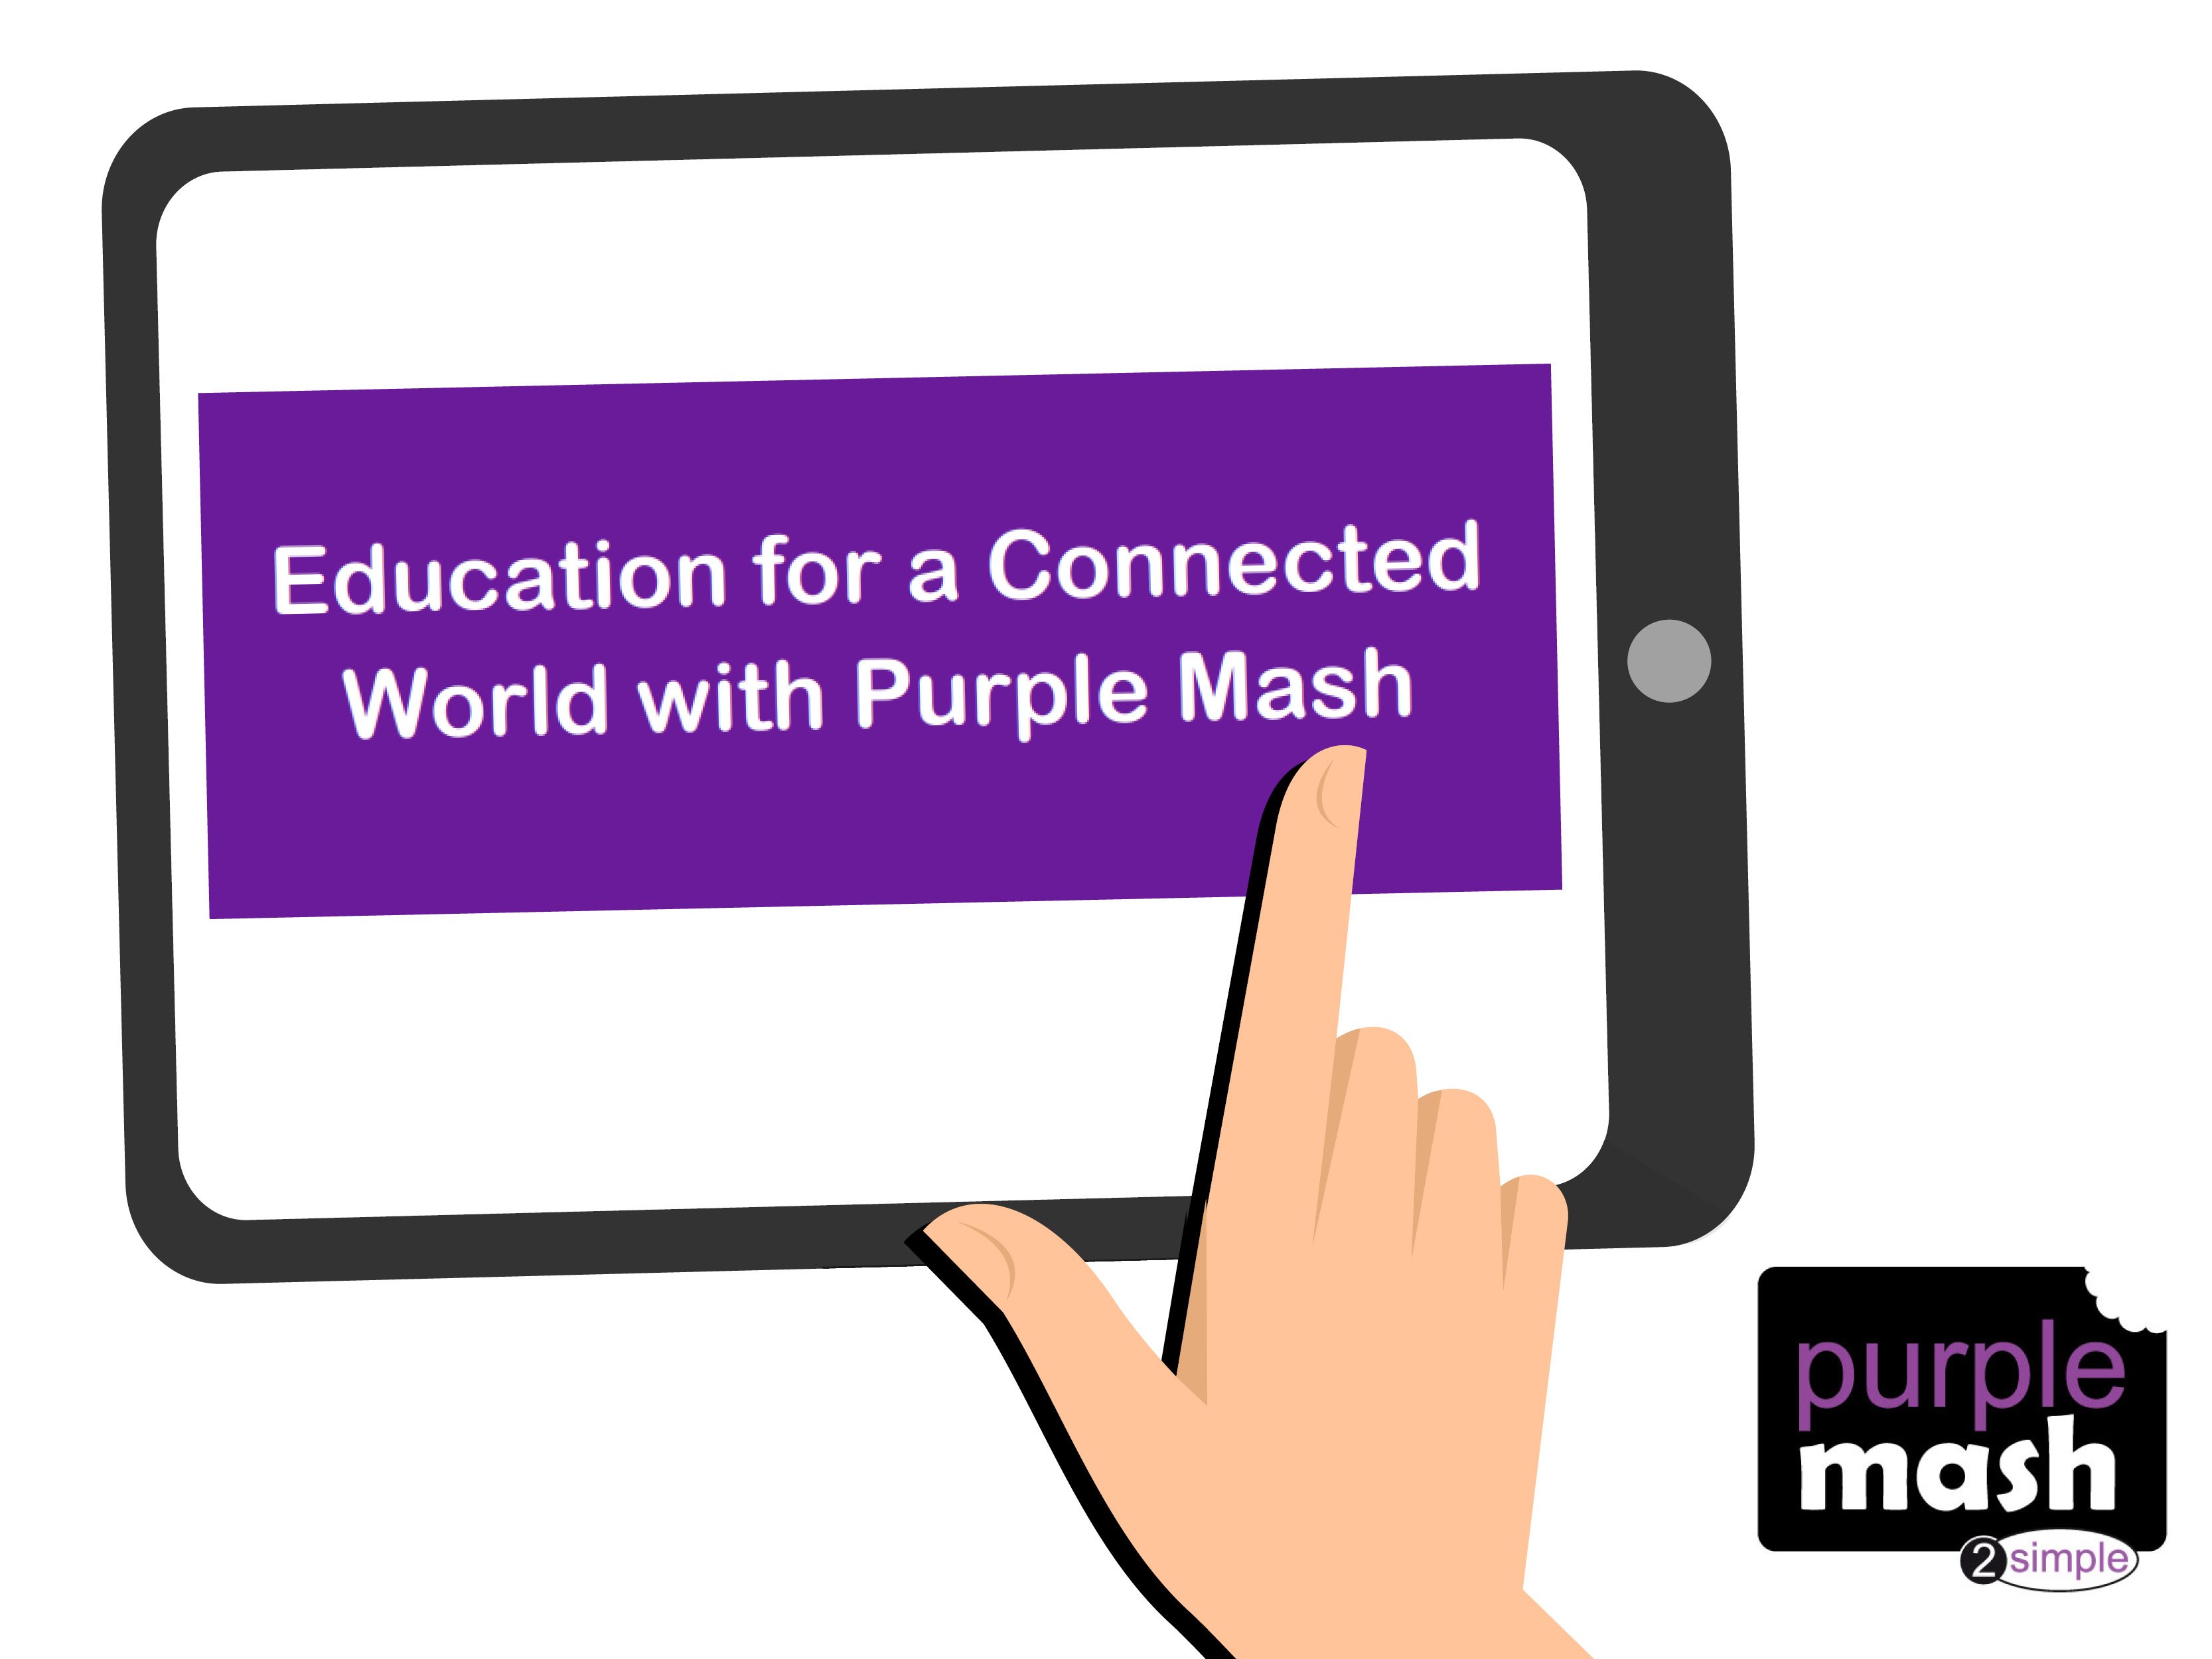 Square image for the Purple Mash education for a connected world free download by 2Simple Ltd